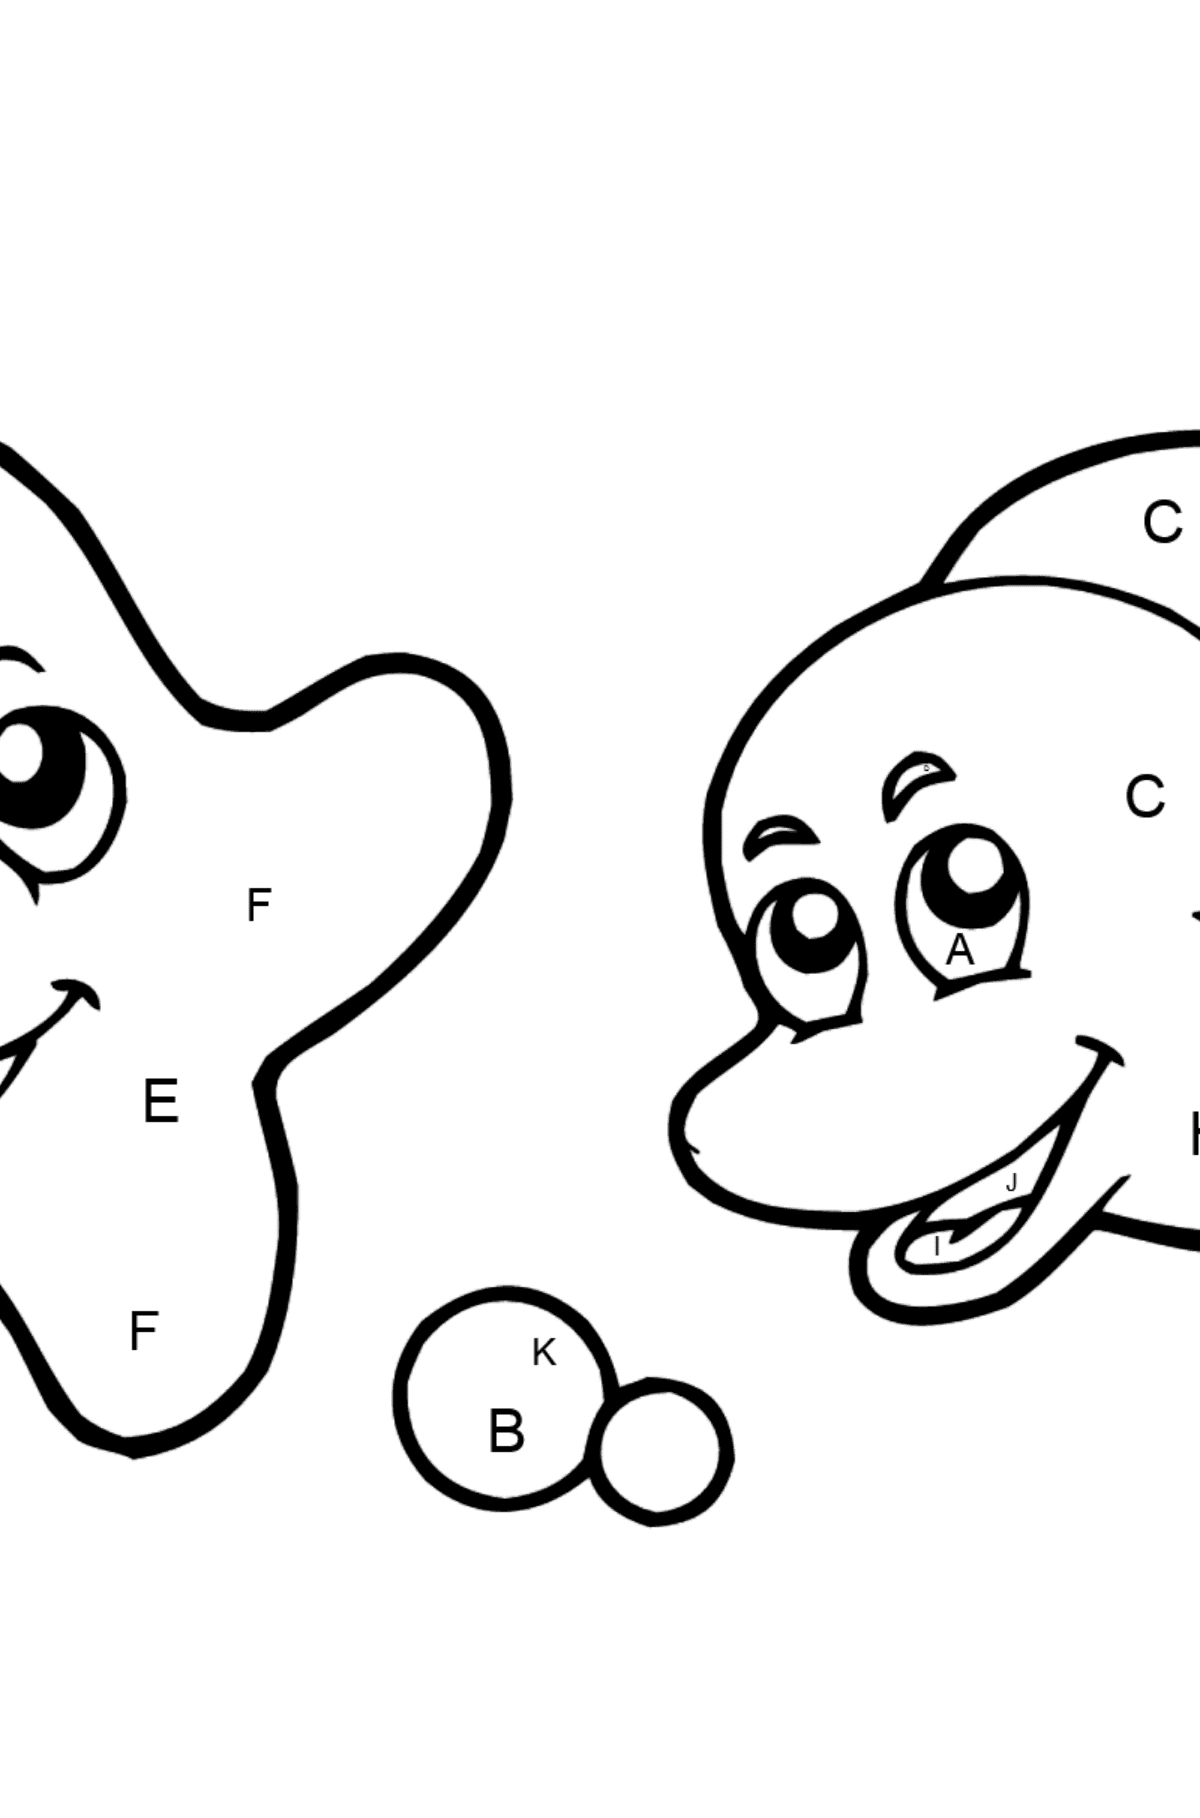 Dolphin and Starfish Coloring page - Coloring by Letters for Kids